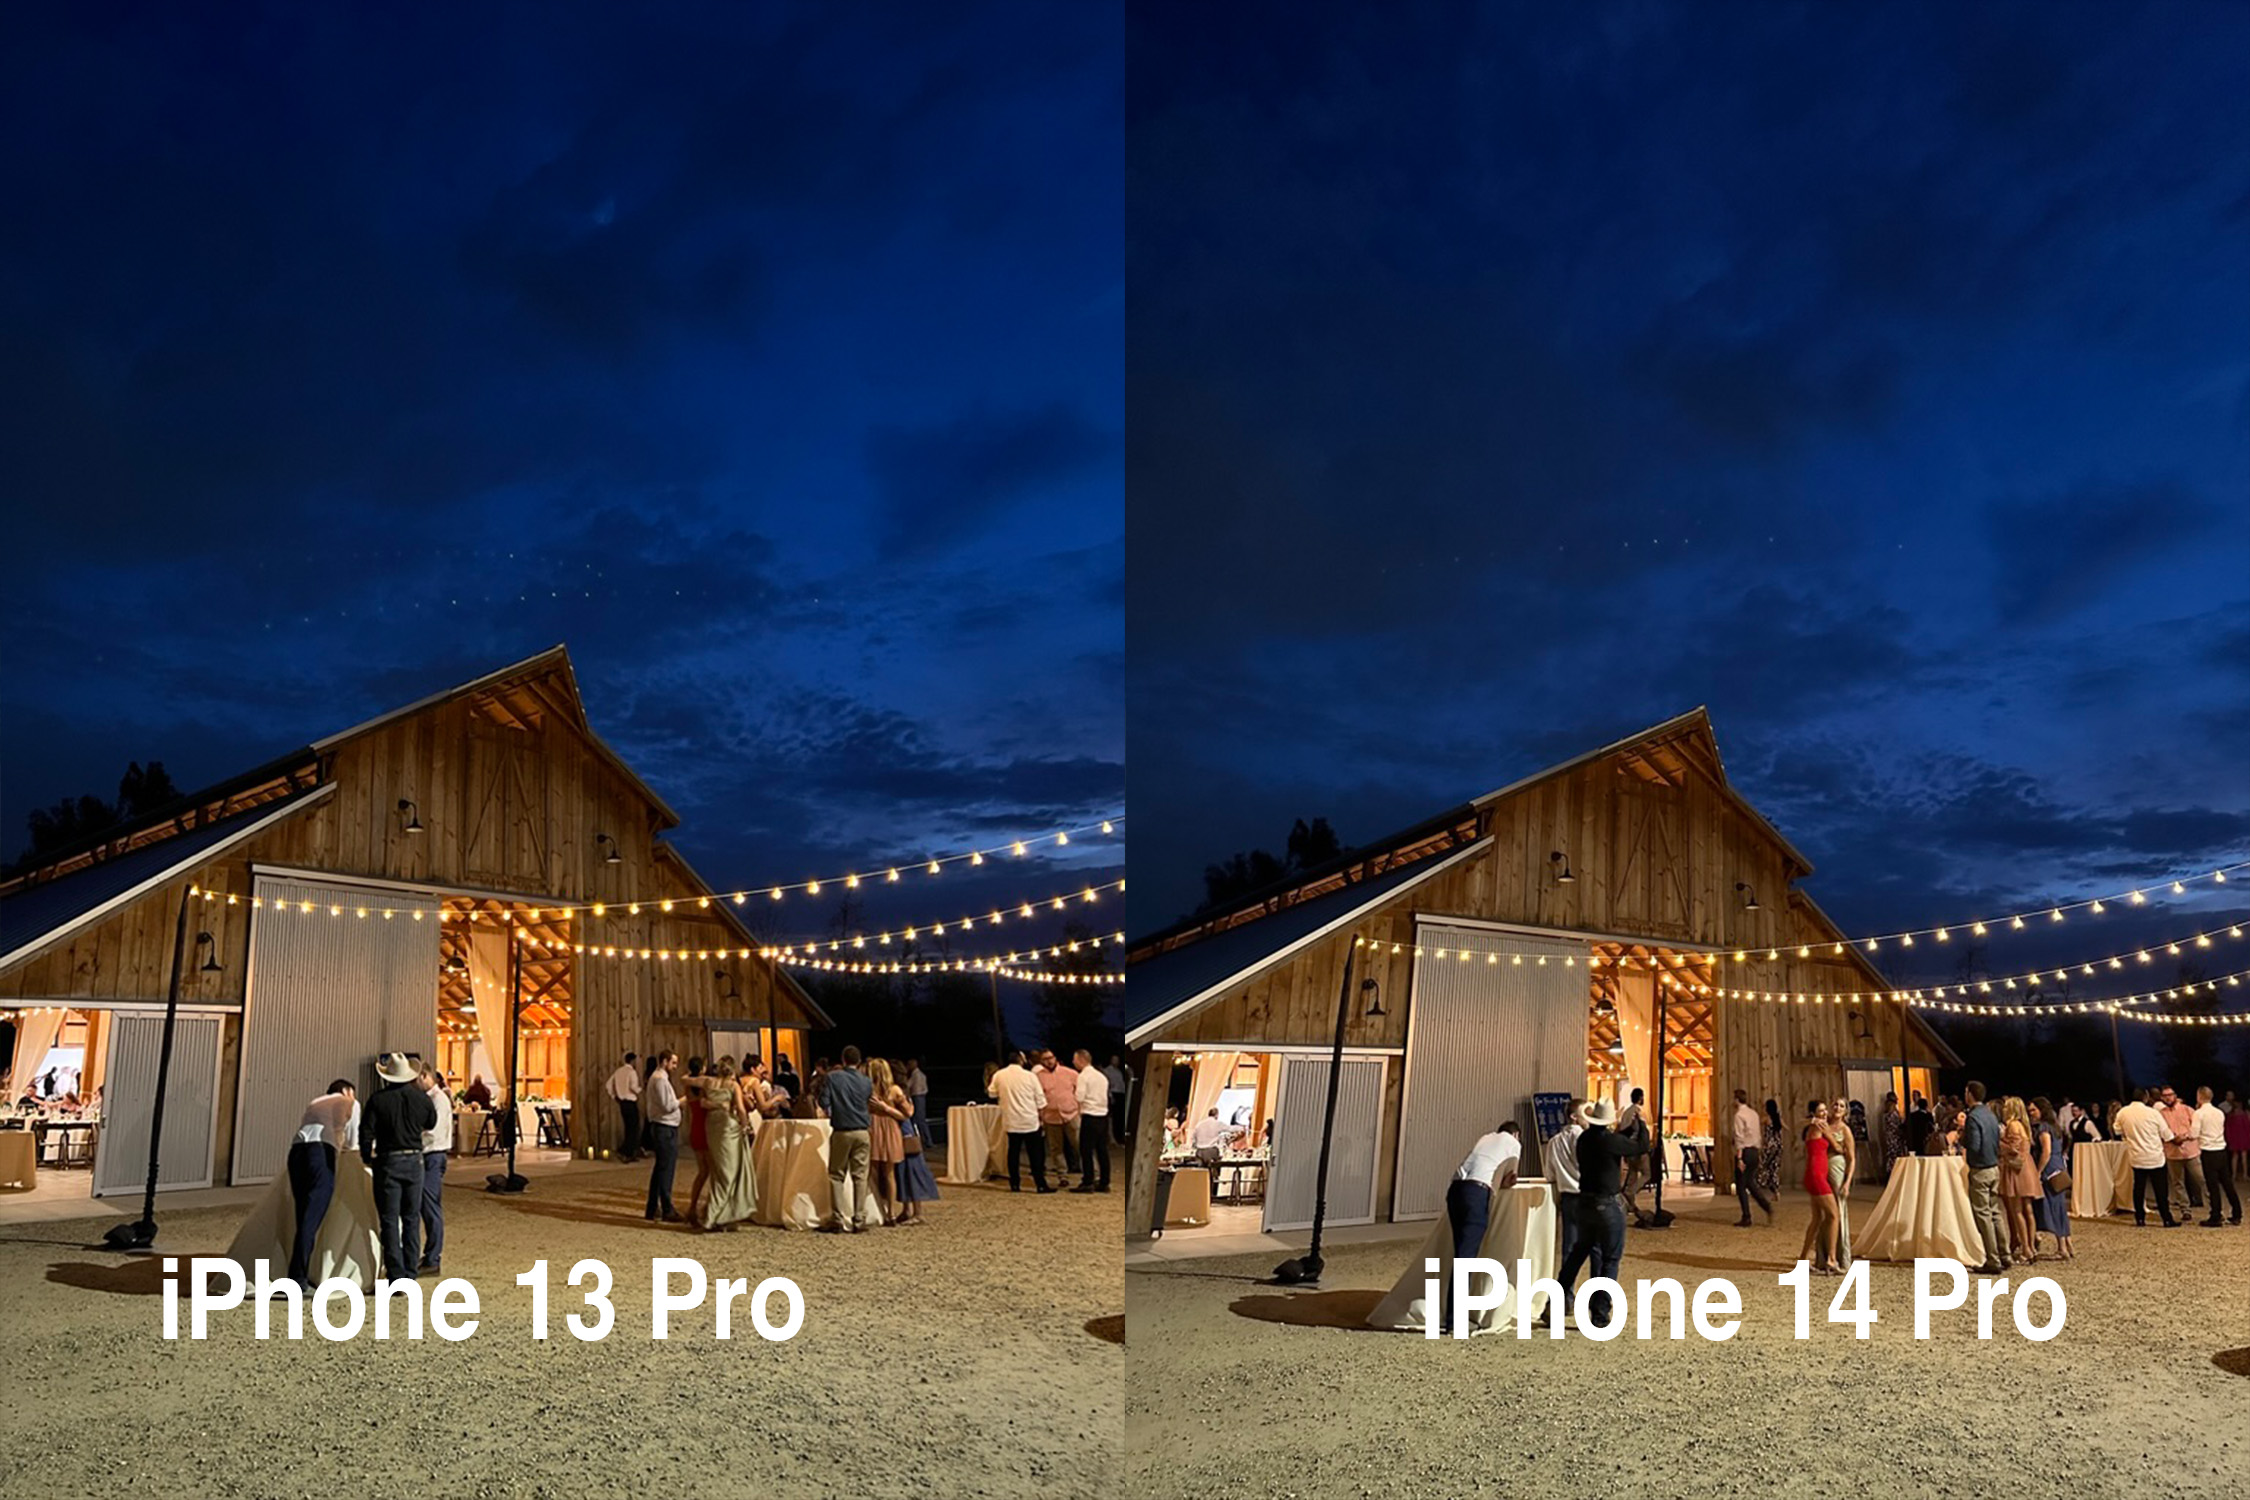 comparison shot of iPhone 13 pro and iPhone 14 pro night mode